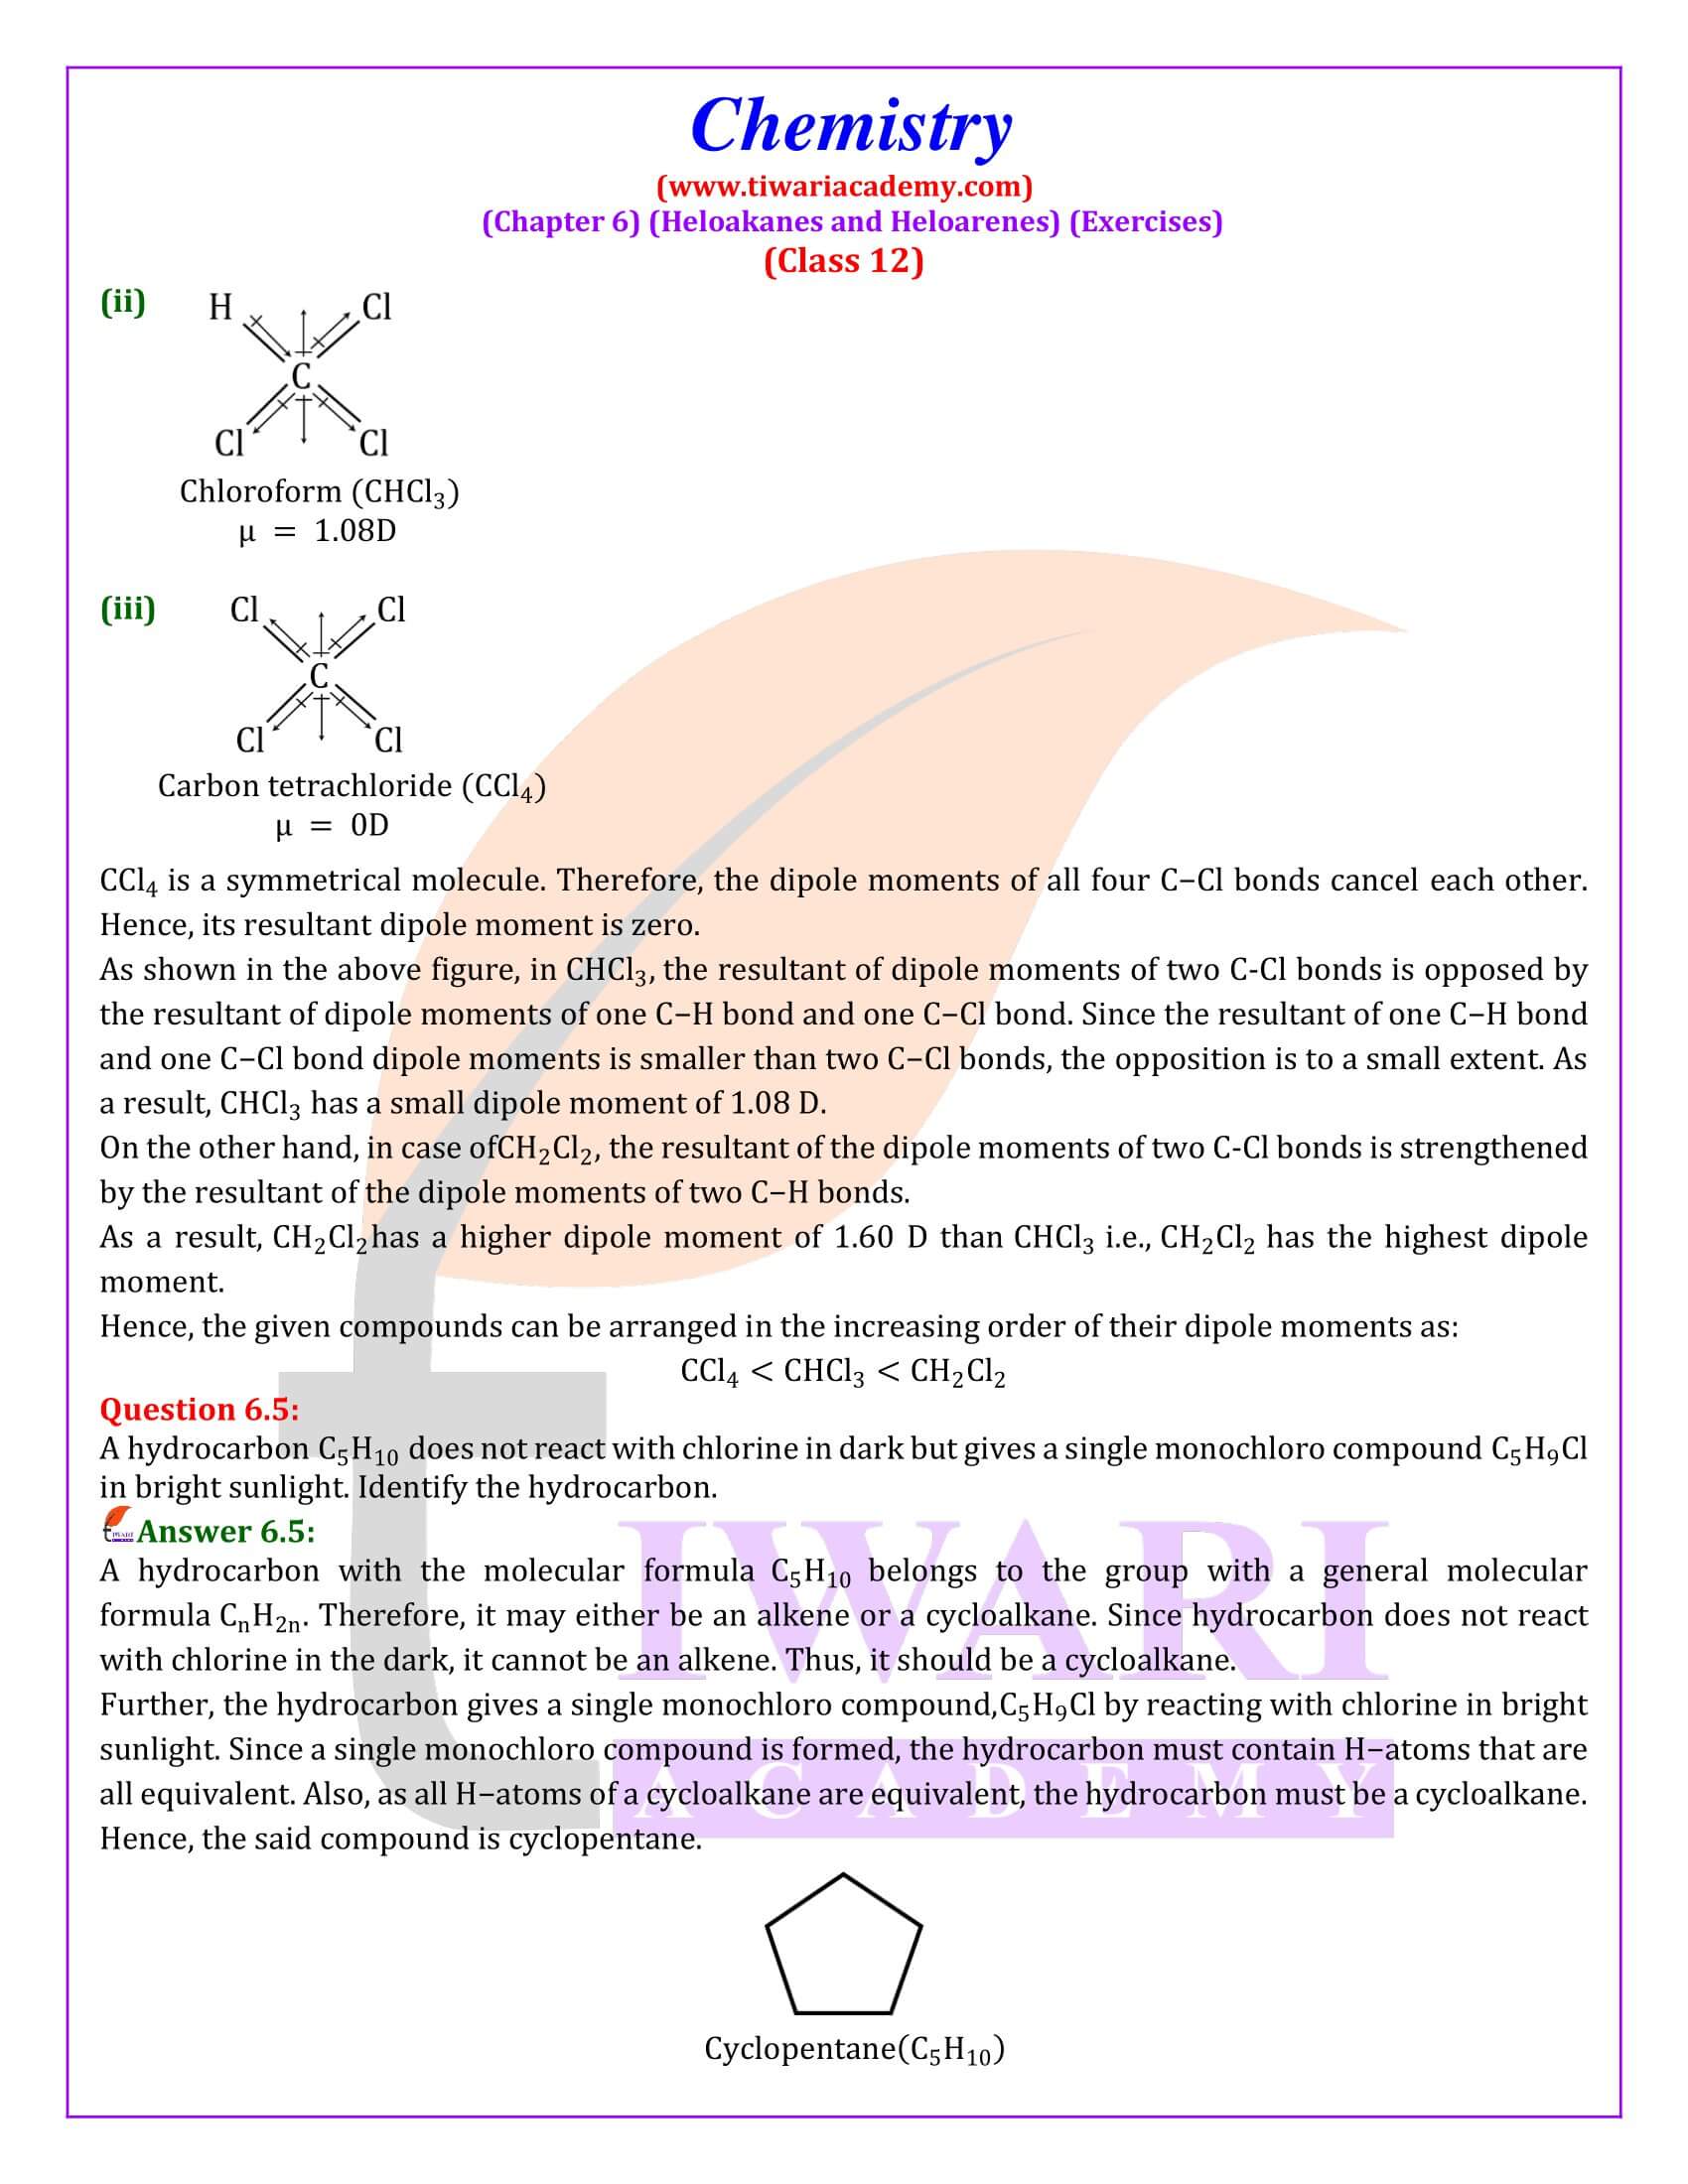 NCERT Solutions for Class 12 Chemistry Chapter 6 for new session